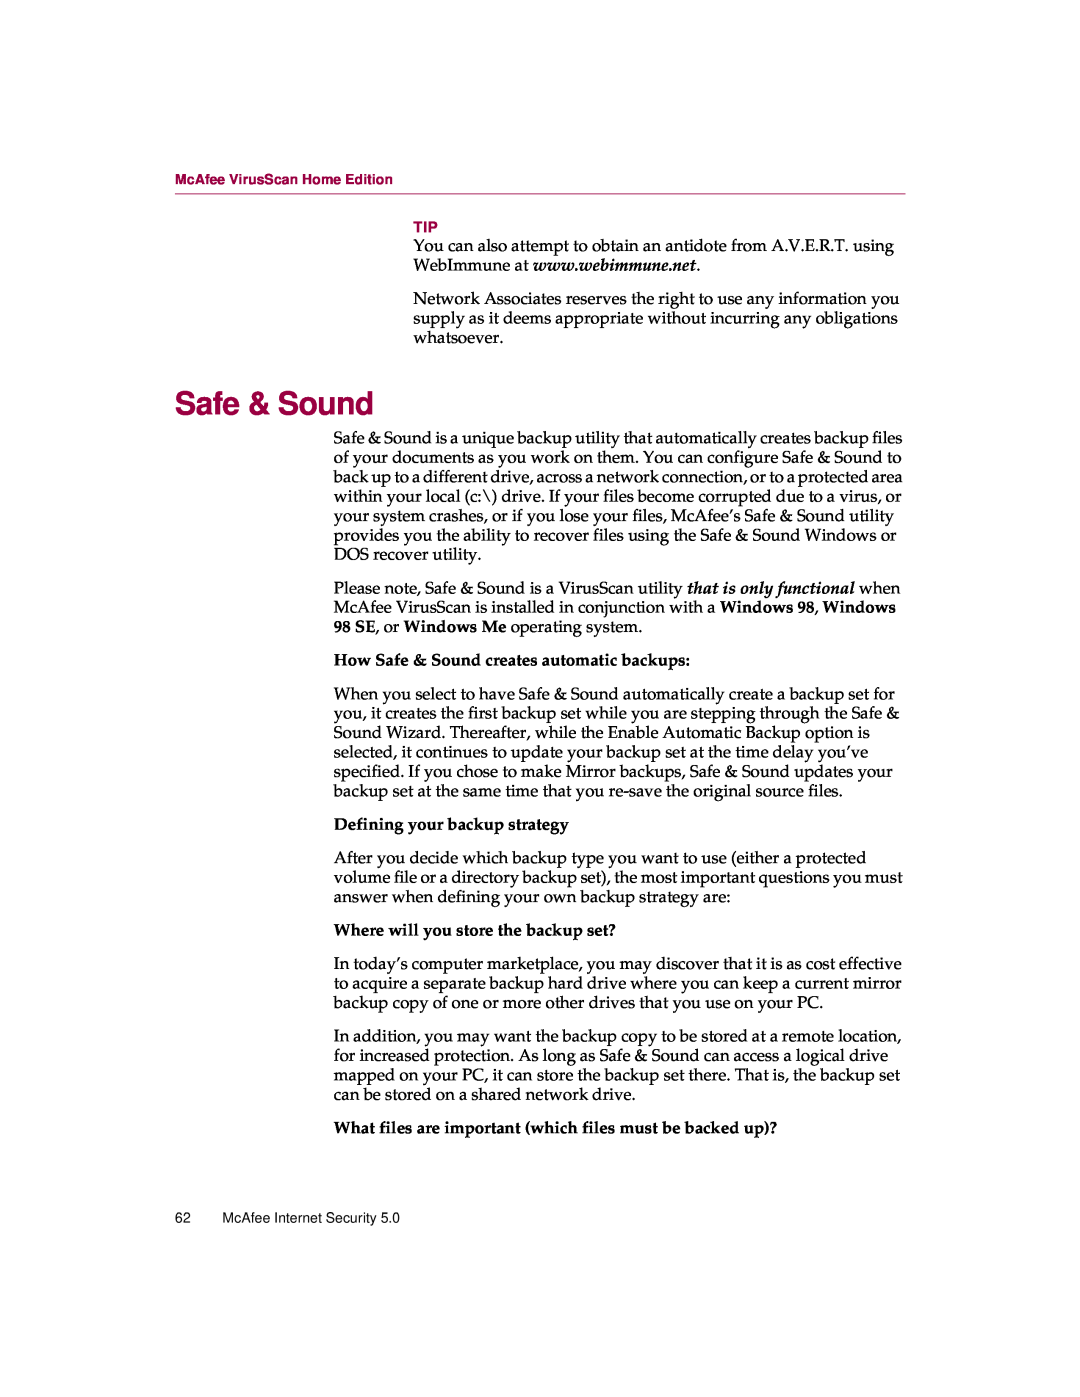 McAfee 5 manual How Safe & Sound creates automatic backups, Defining your backup strategy 